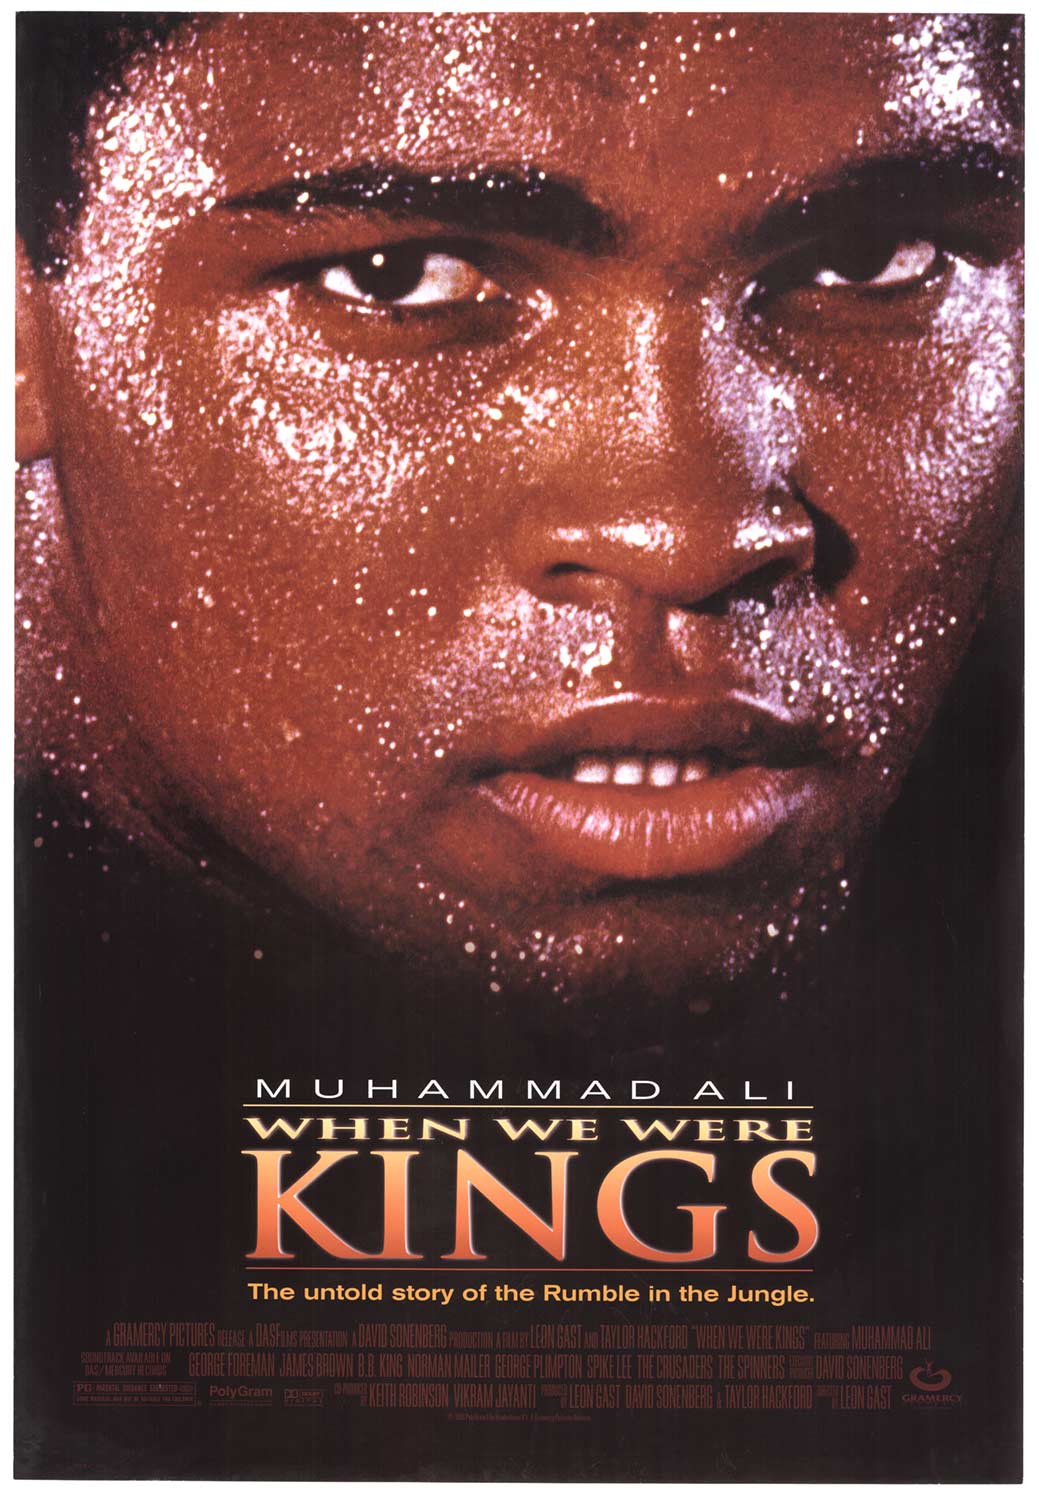 Great super close up of Muhammad Ali. Movie poster, film poster